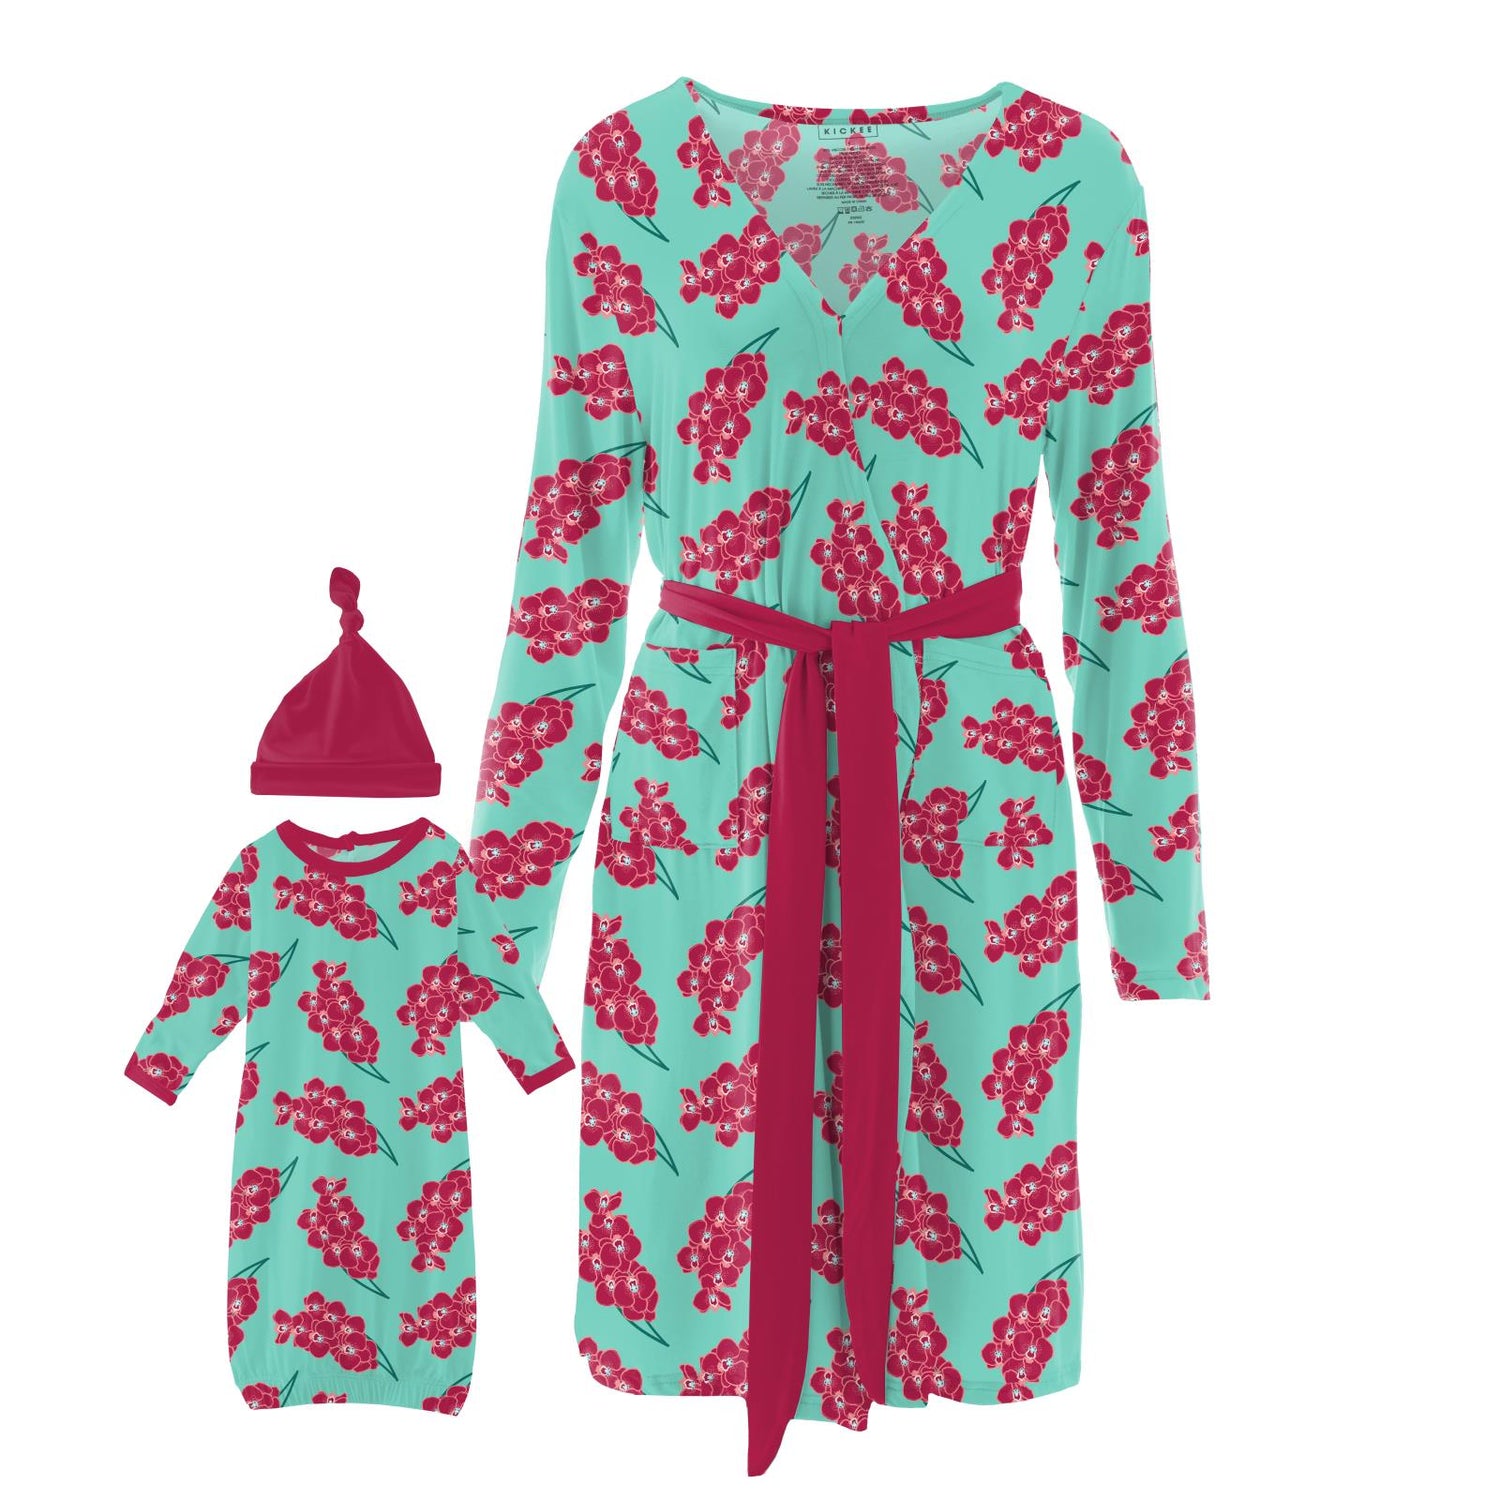 Women's Print Maternity/Nursing Robe &amp; Layette Gown Set in Glass Orchids